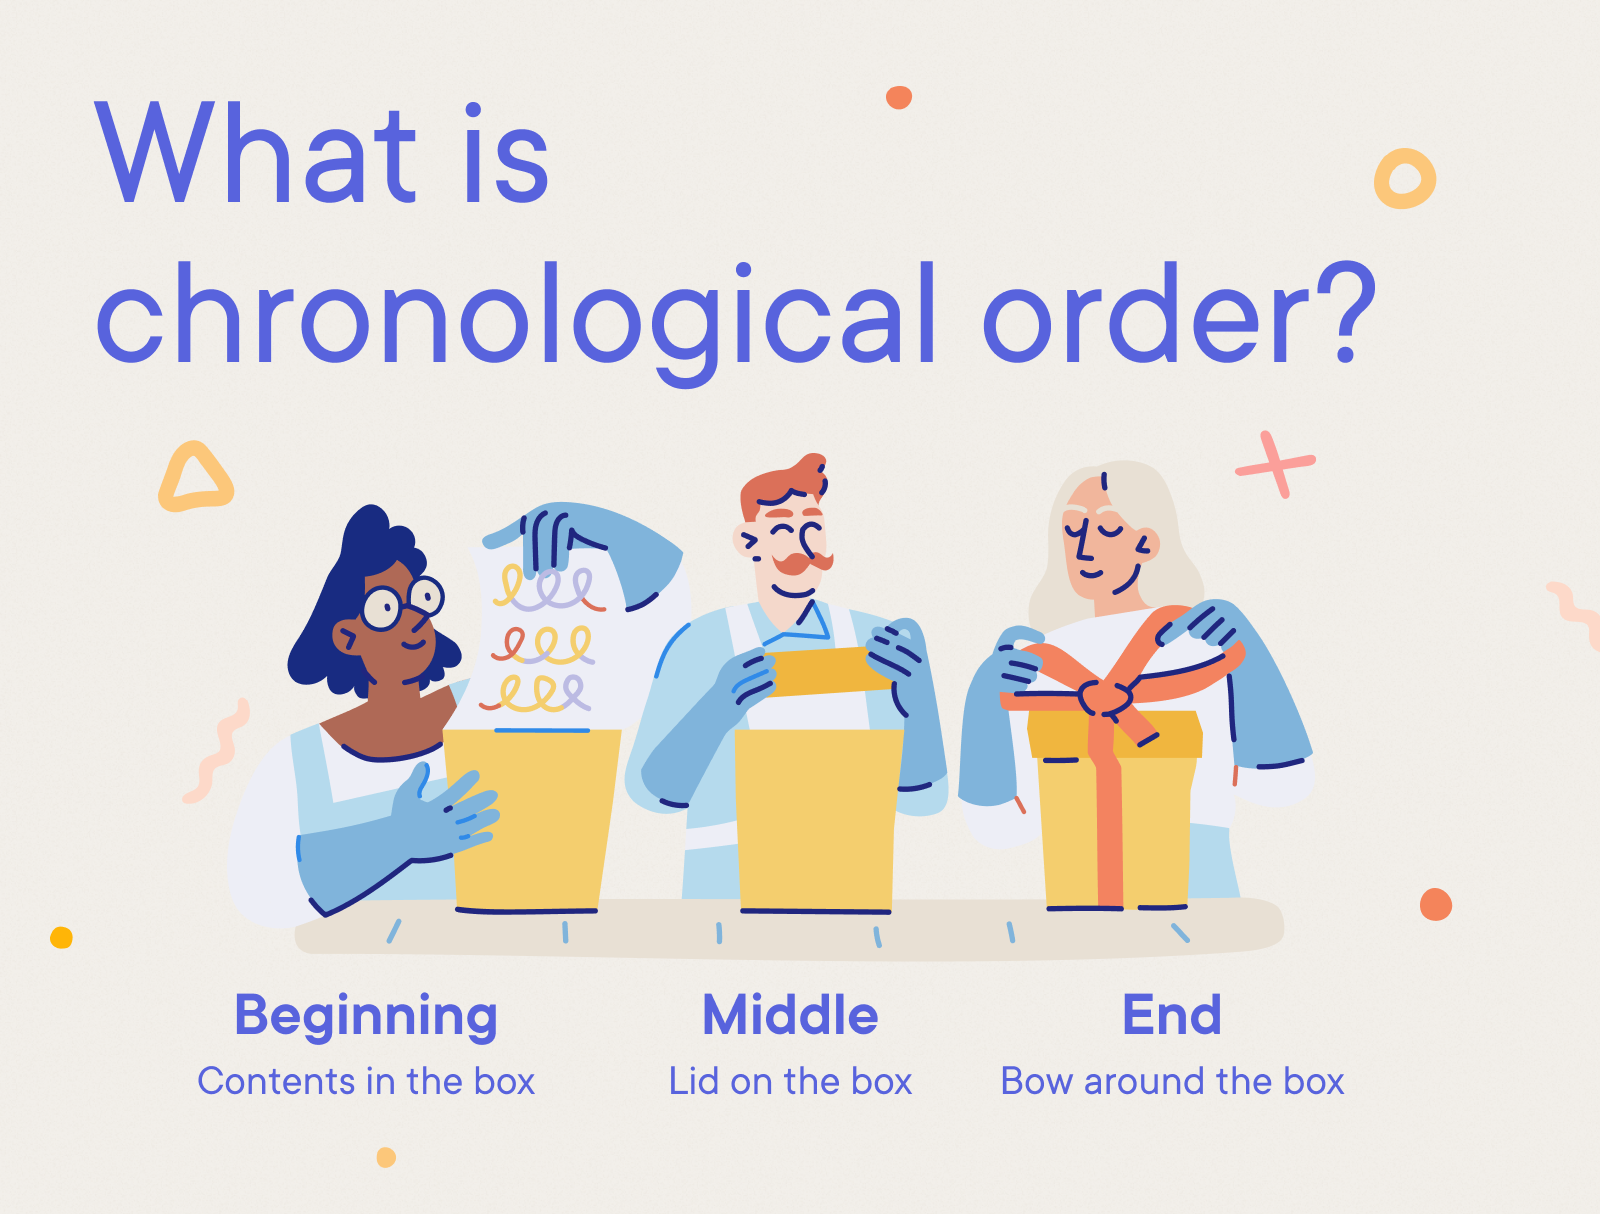 What is chronological order?